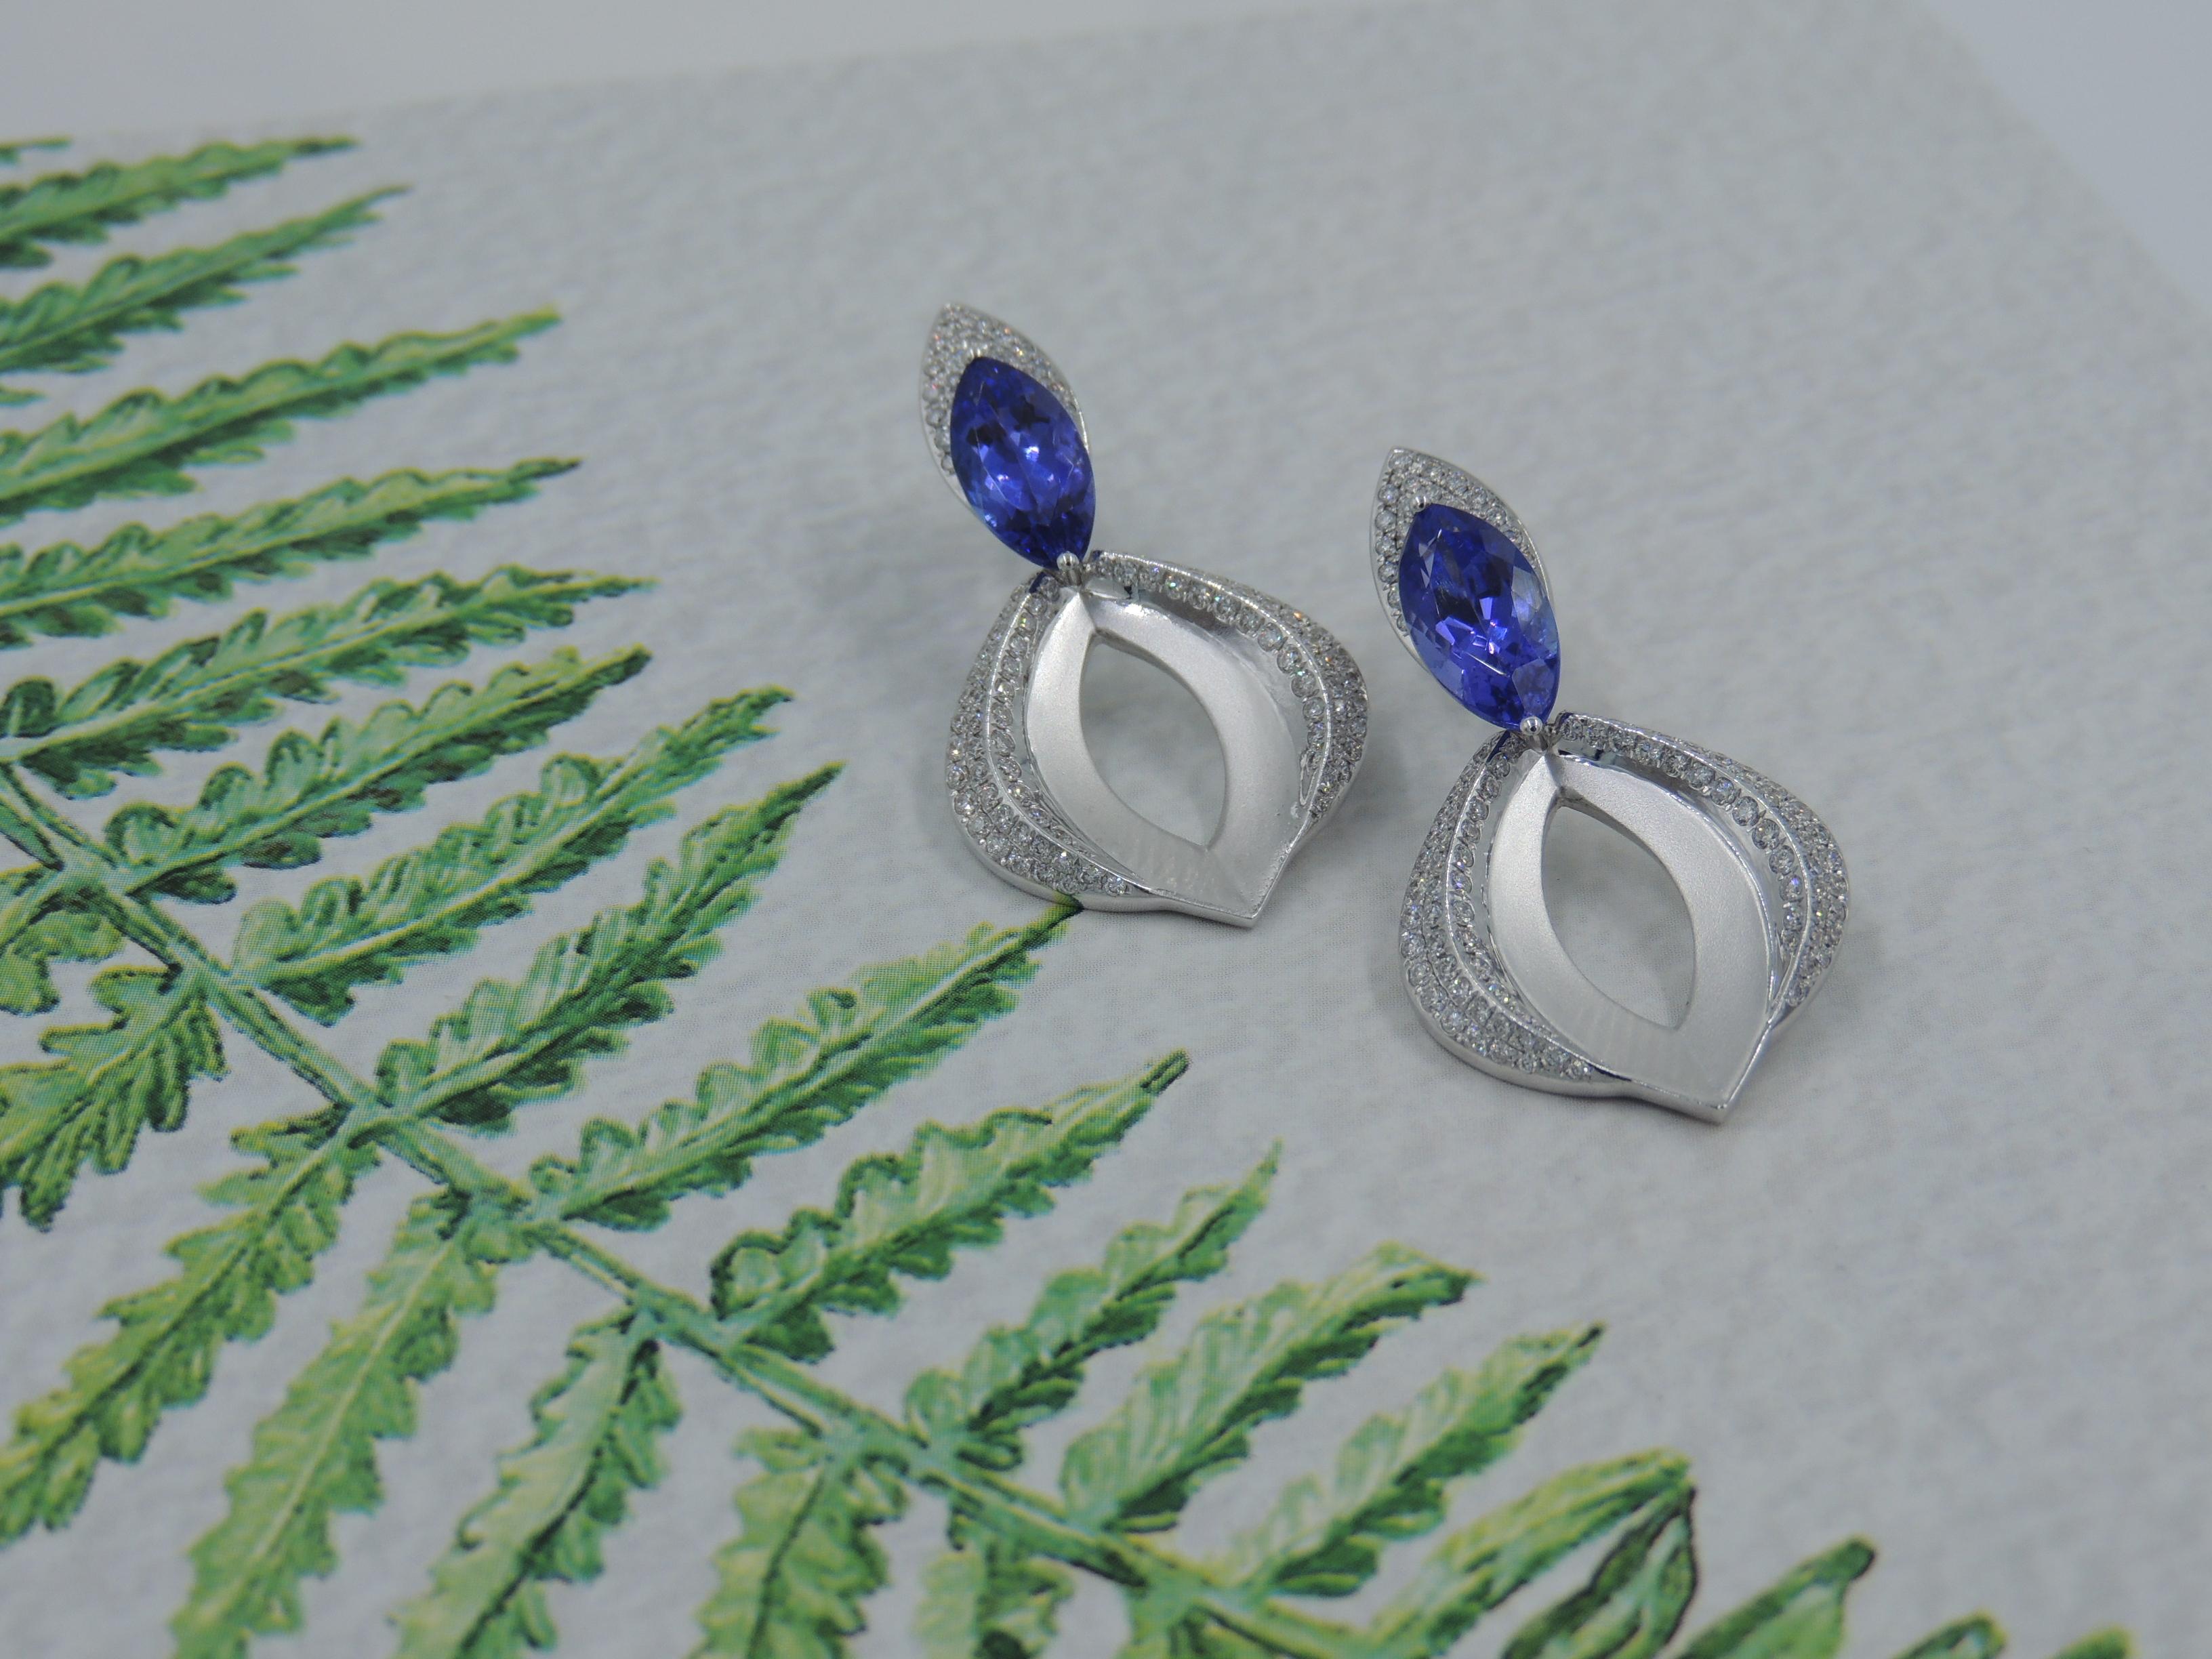 This pair of versatile of diamond and tanzanite earrings are the example of innovative engineering by our brand. This bold yet elegant pair of earrings can be worn in 3 different ways making it an exceptional accessory for any occasion. 

The user